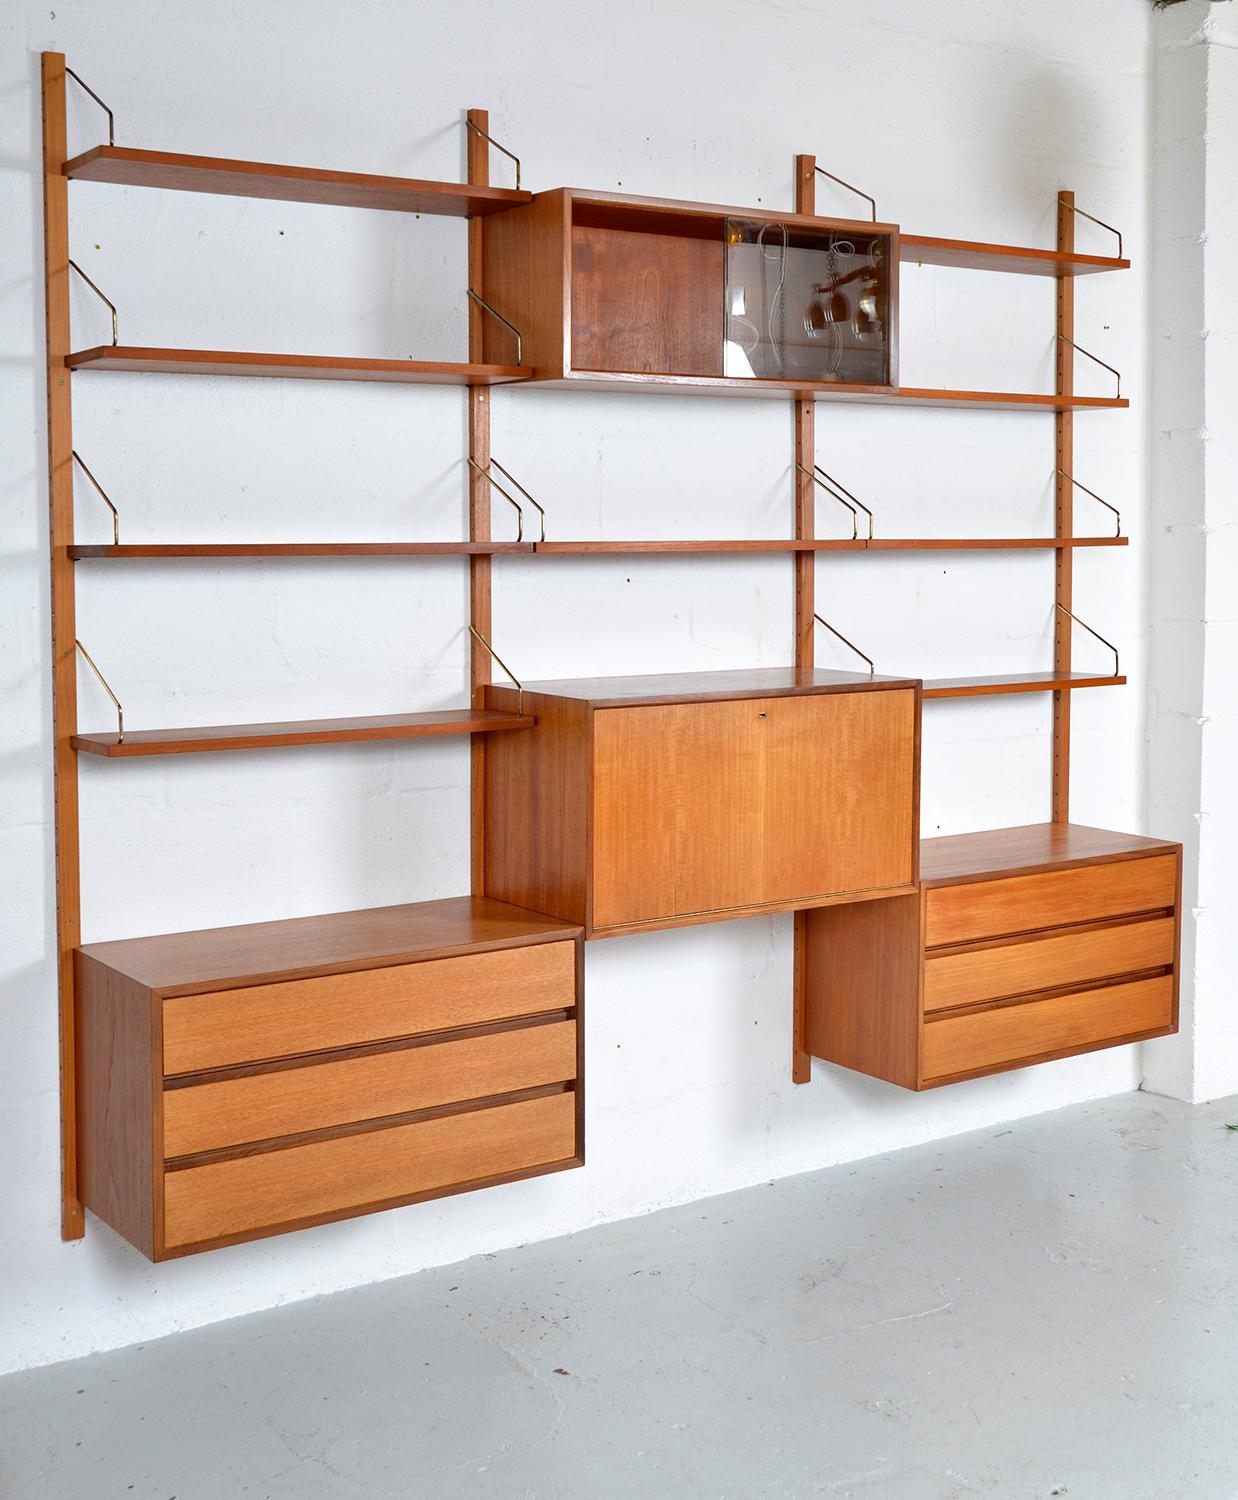 This highly versatile and functional “Royal System” was originally designed by Poul Cadovius in 1948. This three-bay teak shelving system offers a wide variety of storage and display options. 
The set includes two three-drawer chests of drawers, a